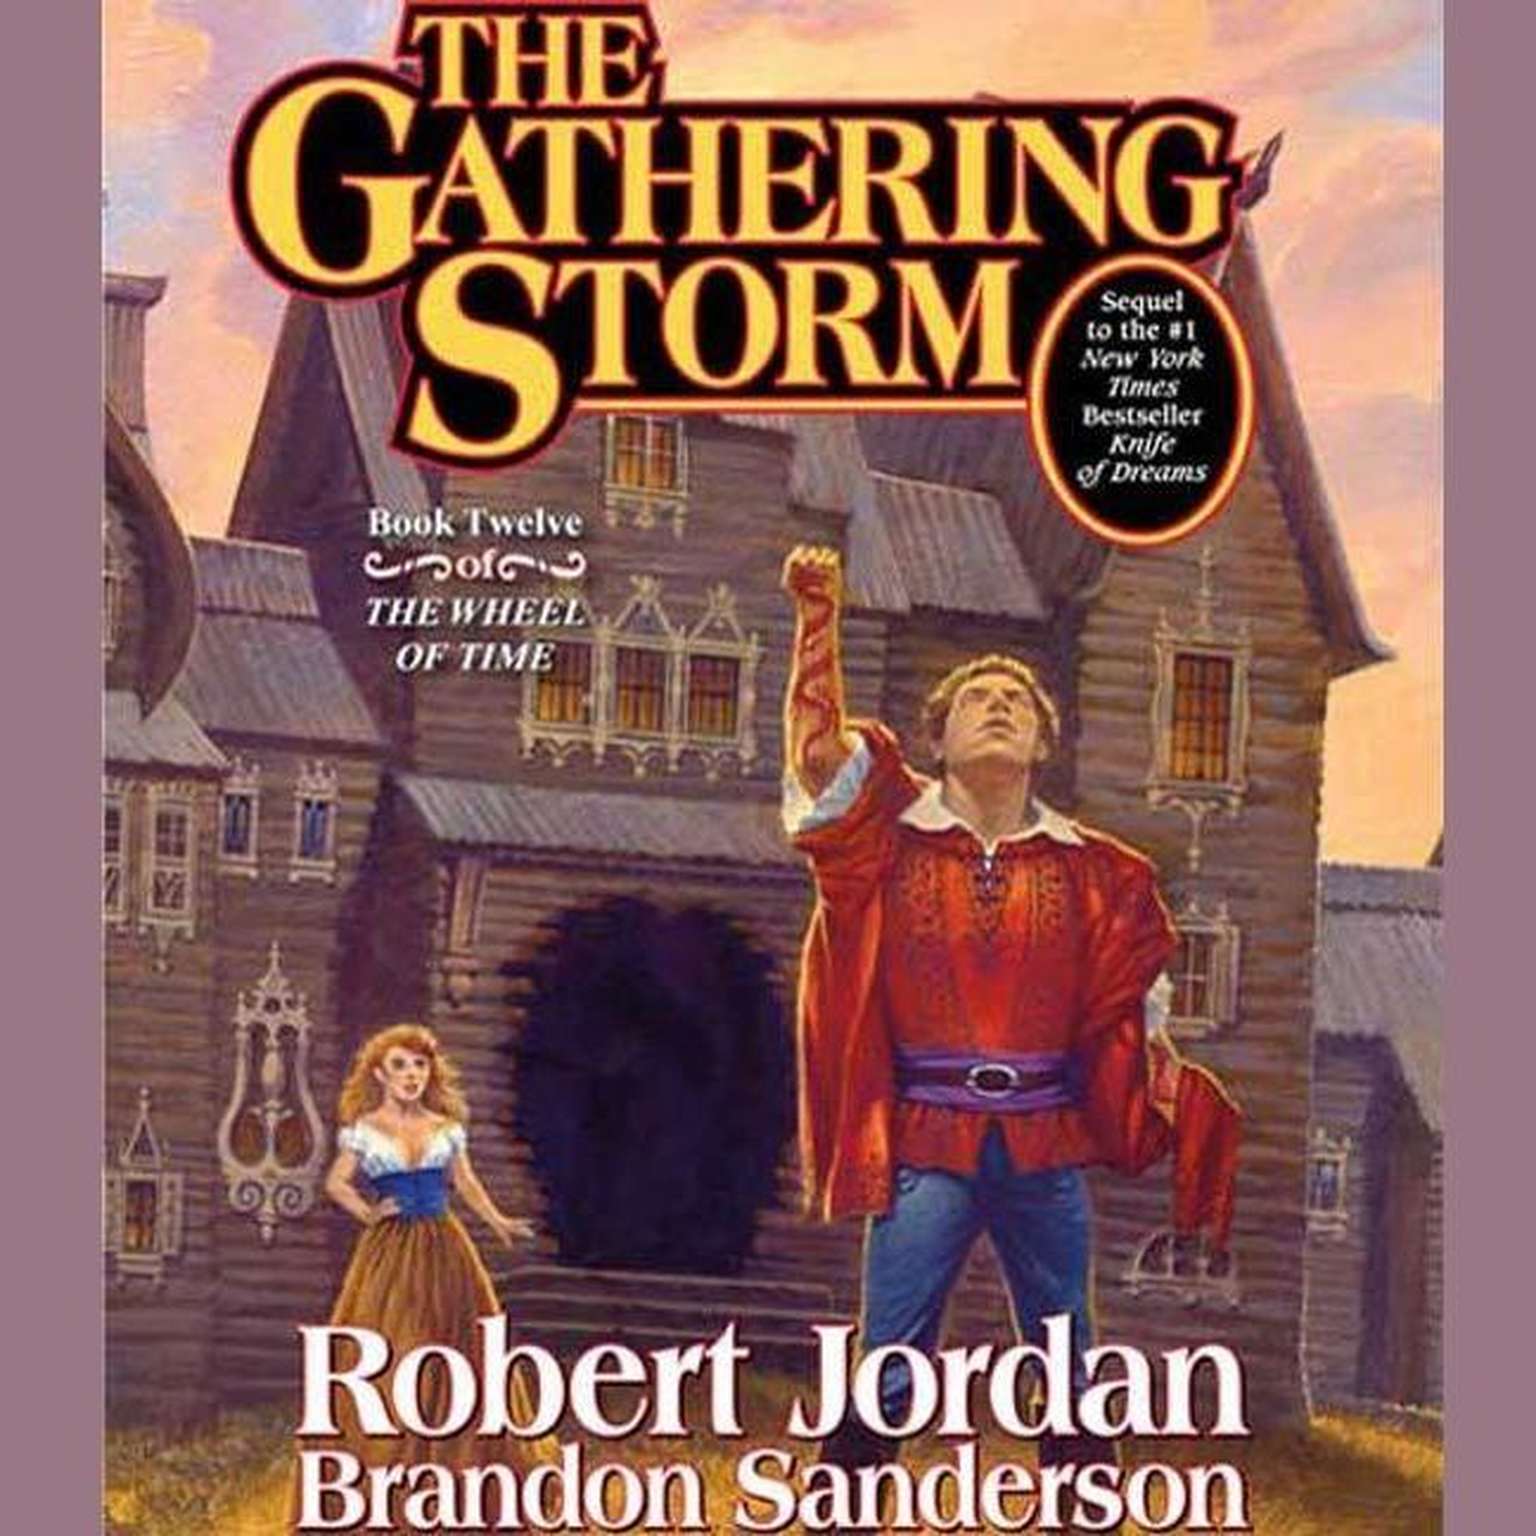 The Gathering Storm - Audiobook | Listen Instantly!